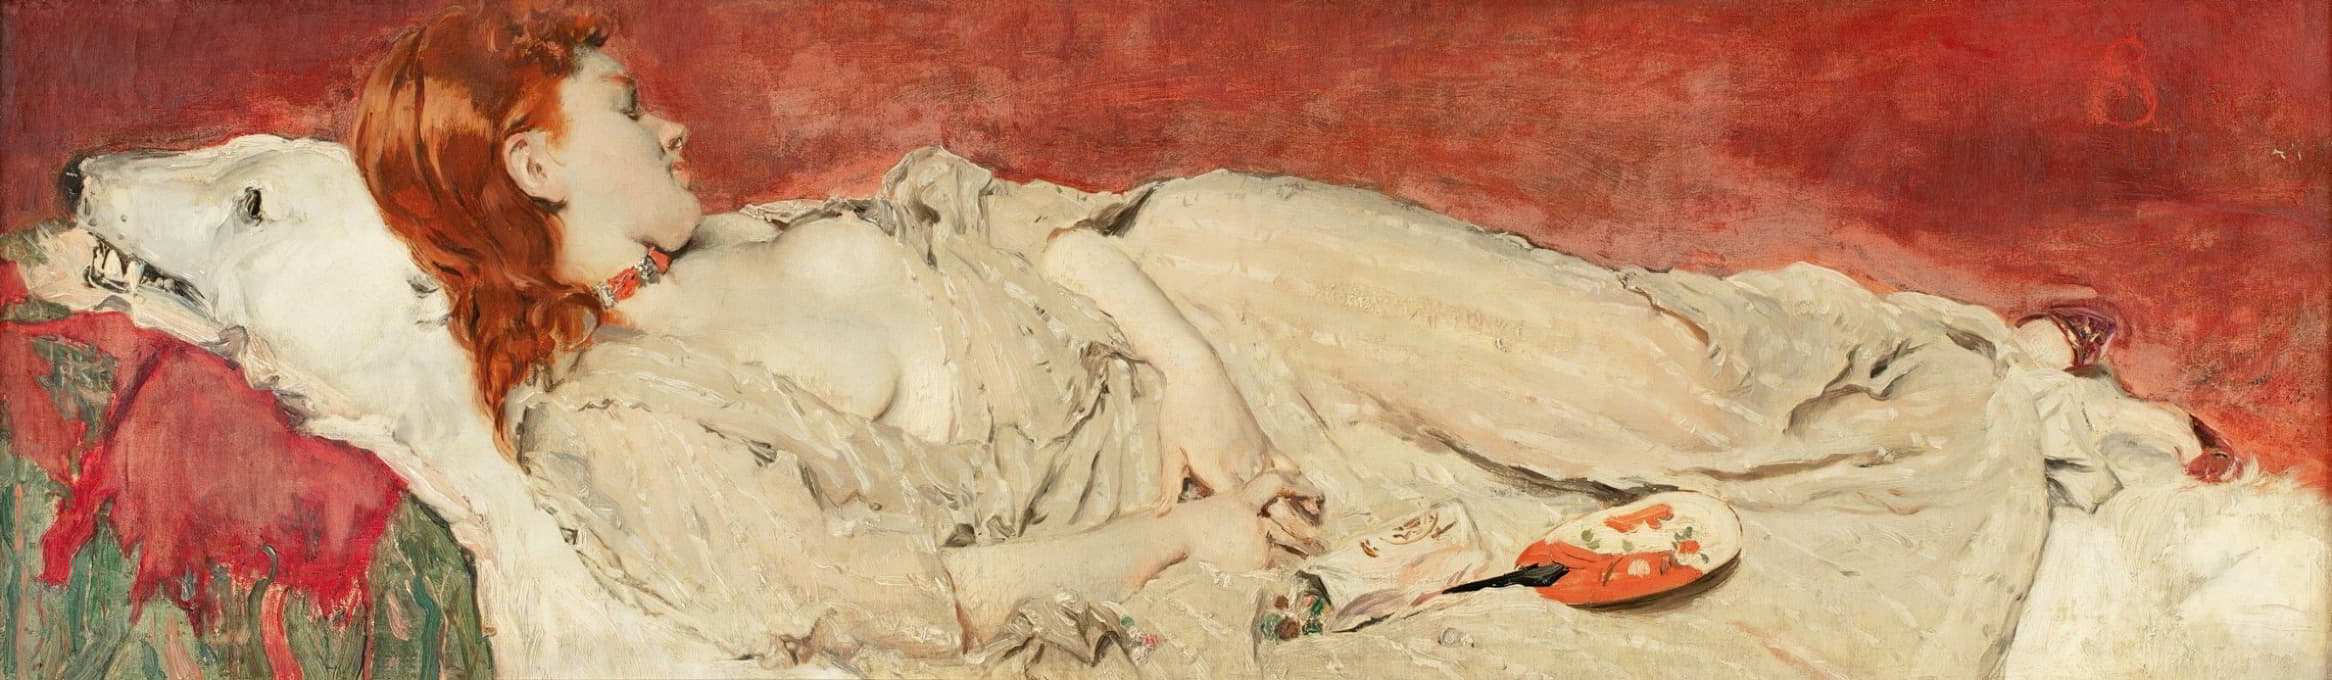 Alfred Stevens - A young red-hair girl sleeping on a bearskin